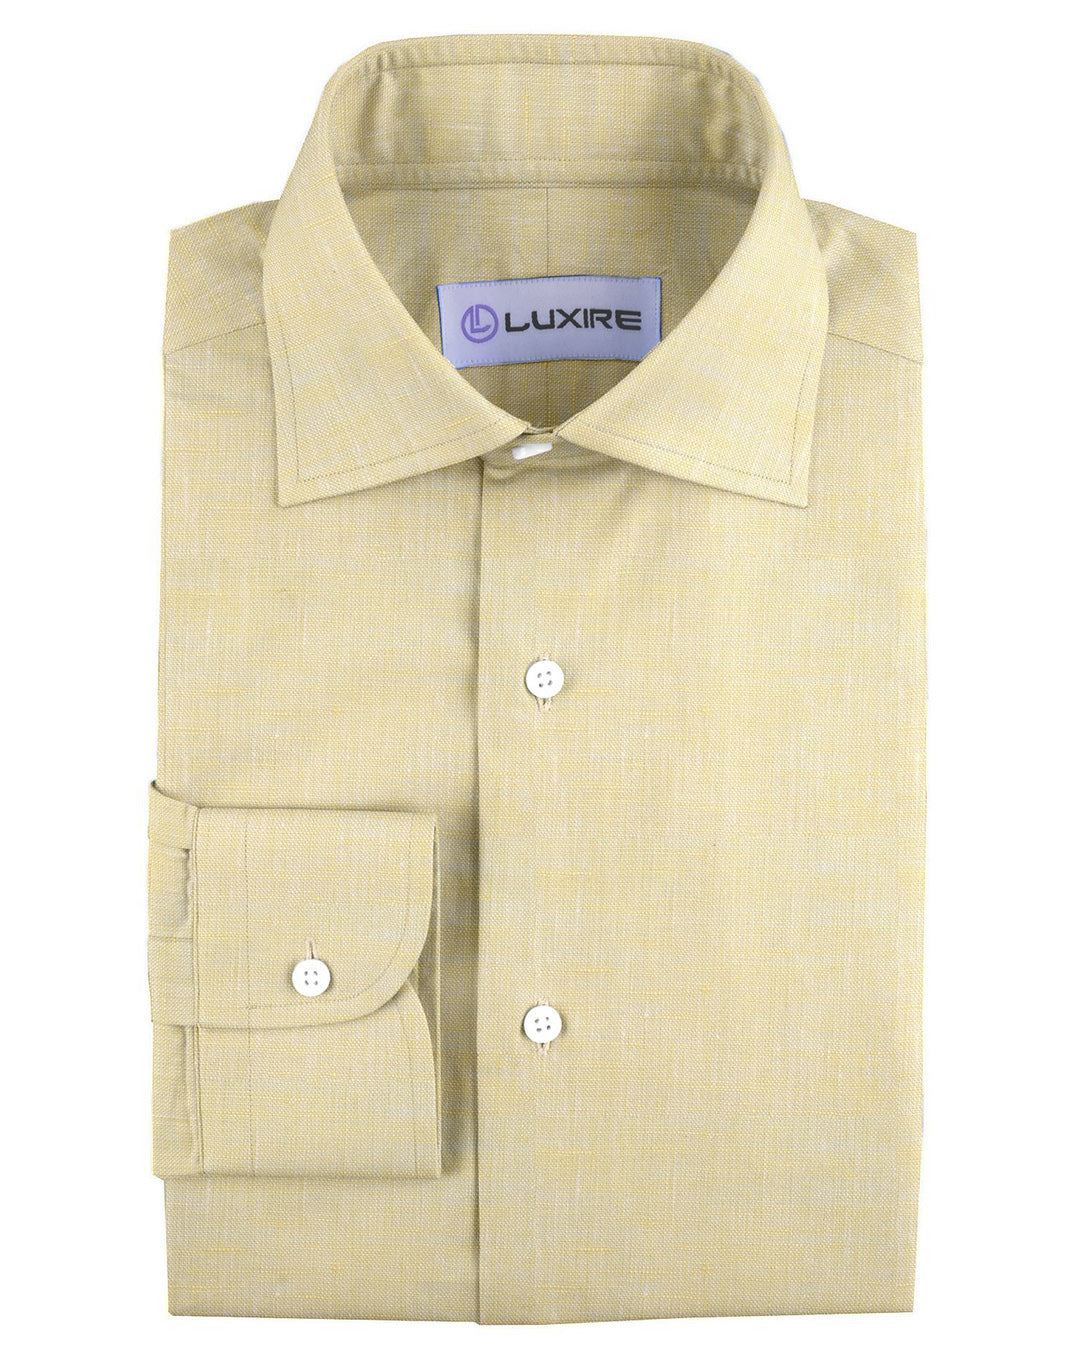 Pullover Shirt in Pale Yellow Linen